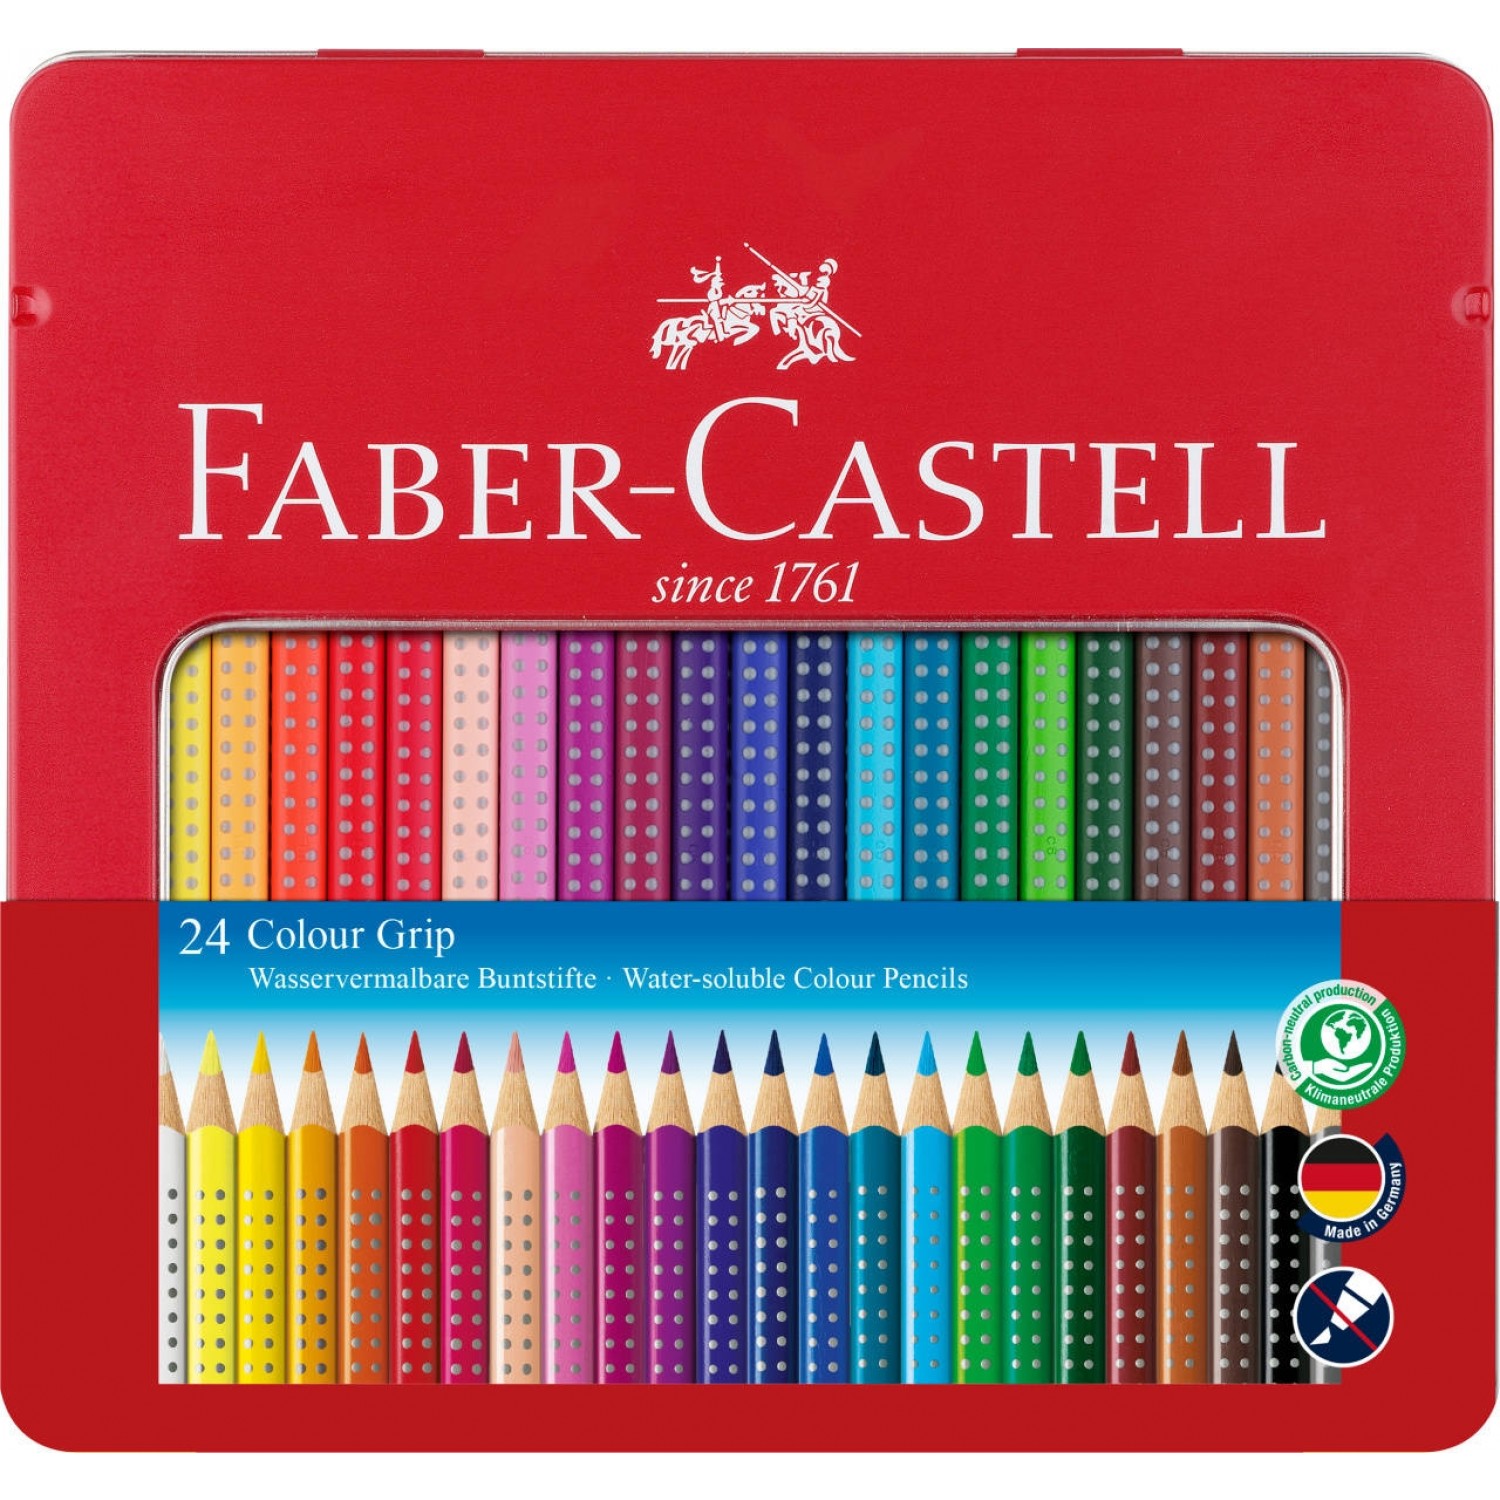 Faber-Castell Colour Grip Crayon 24 shades in tin